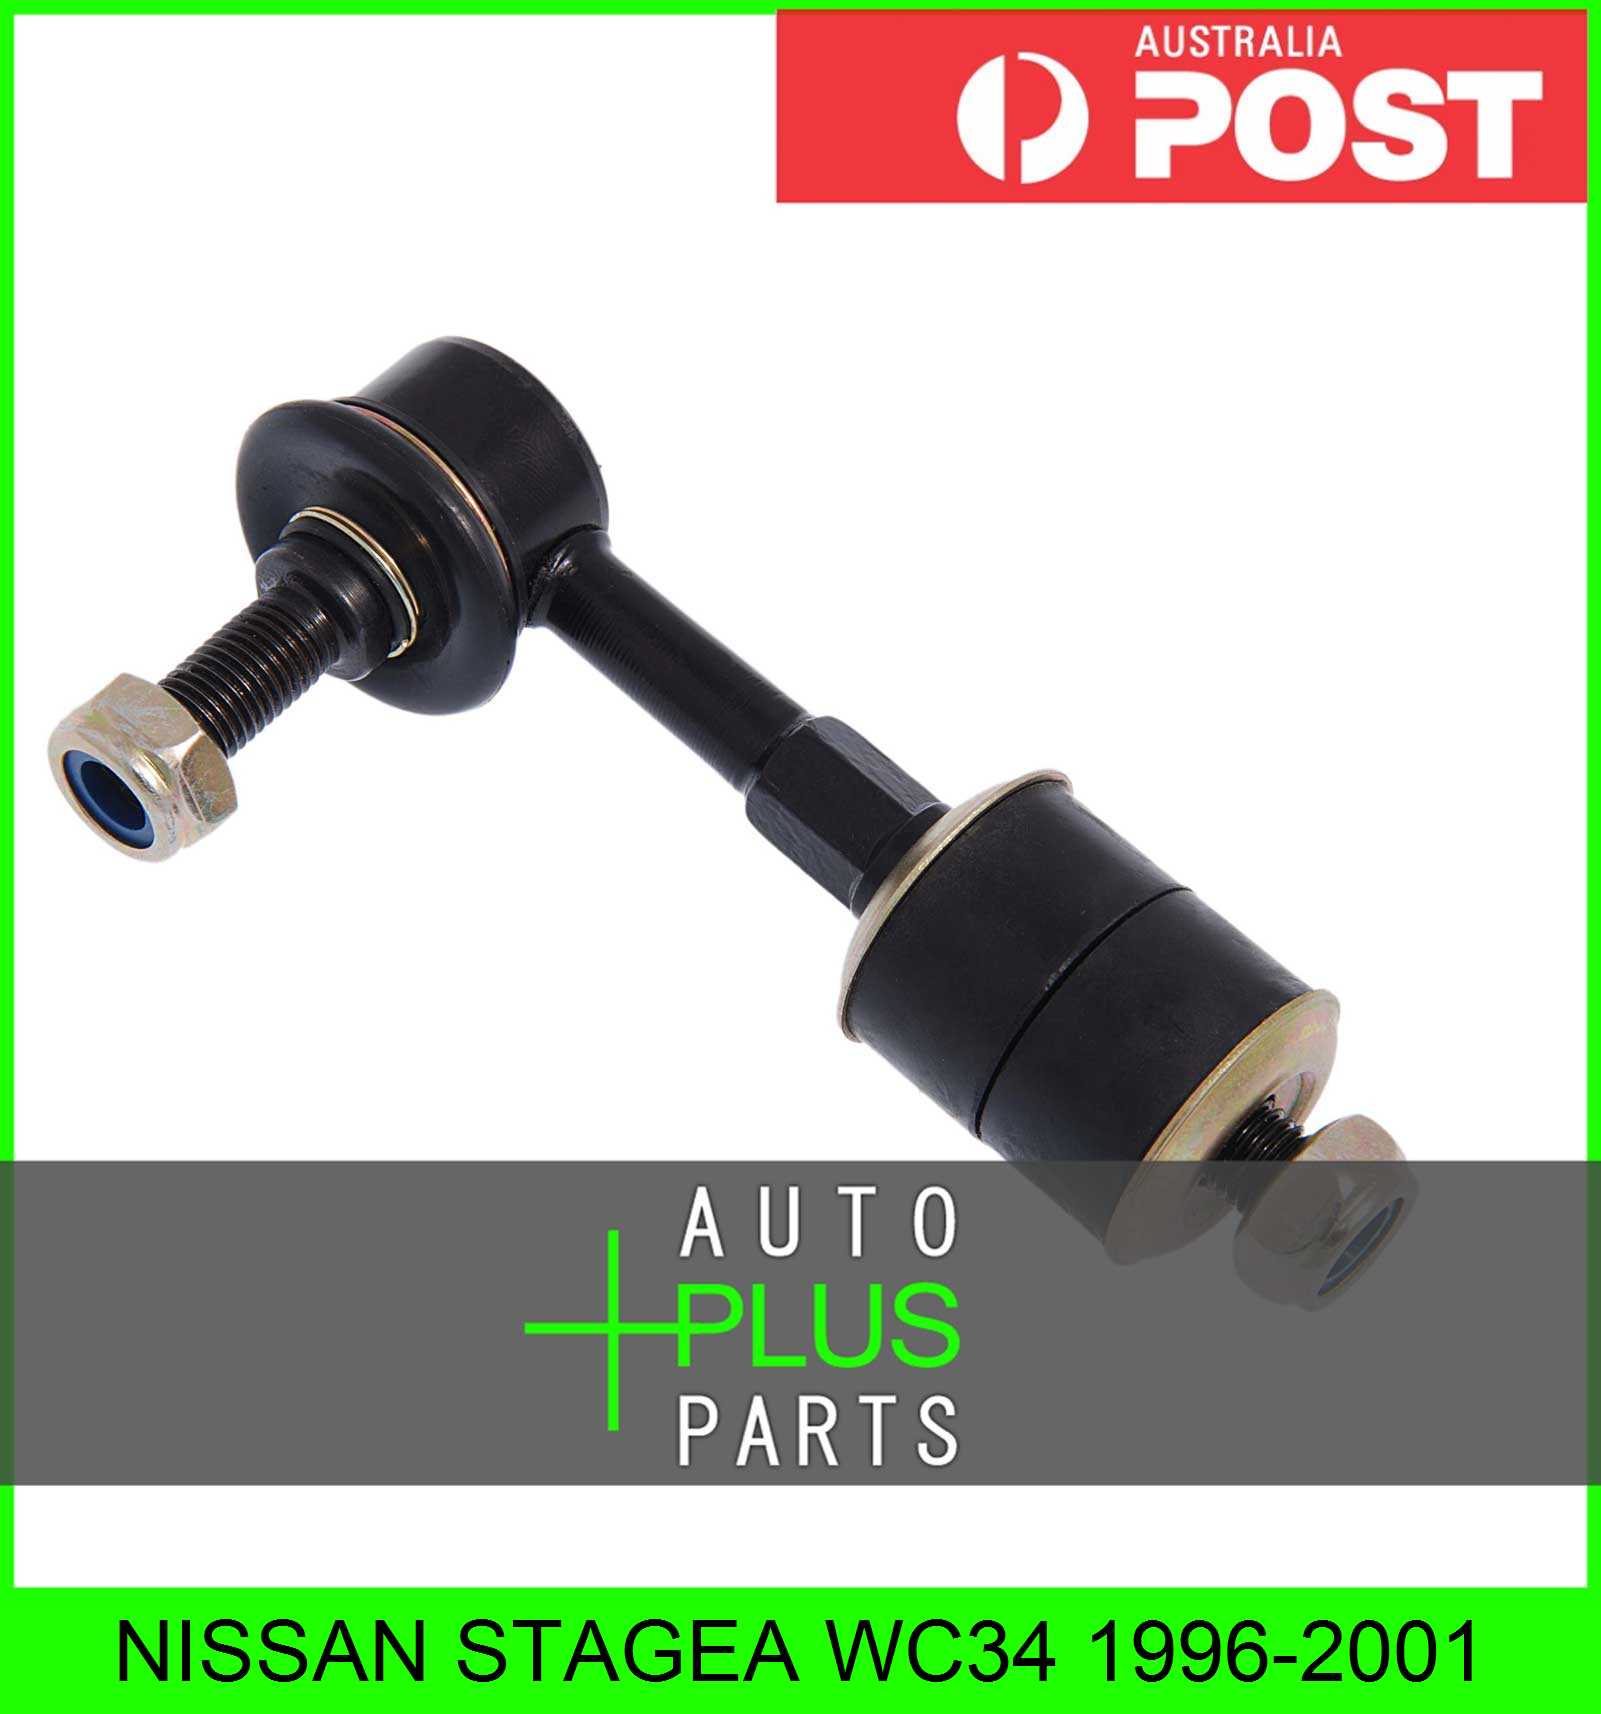 Anti Roll /Sway Bar Link Fits NISSAN STAGEA WC34 Front Stabiliser